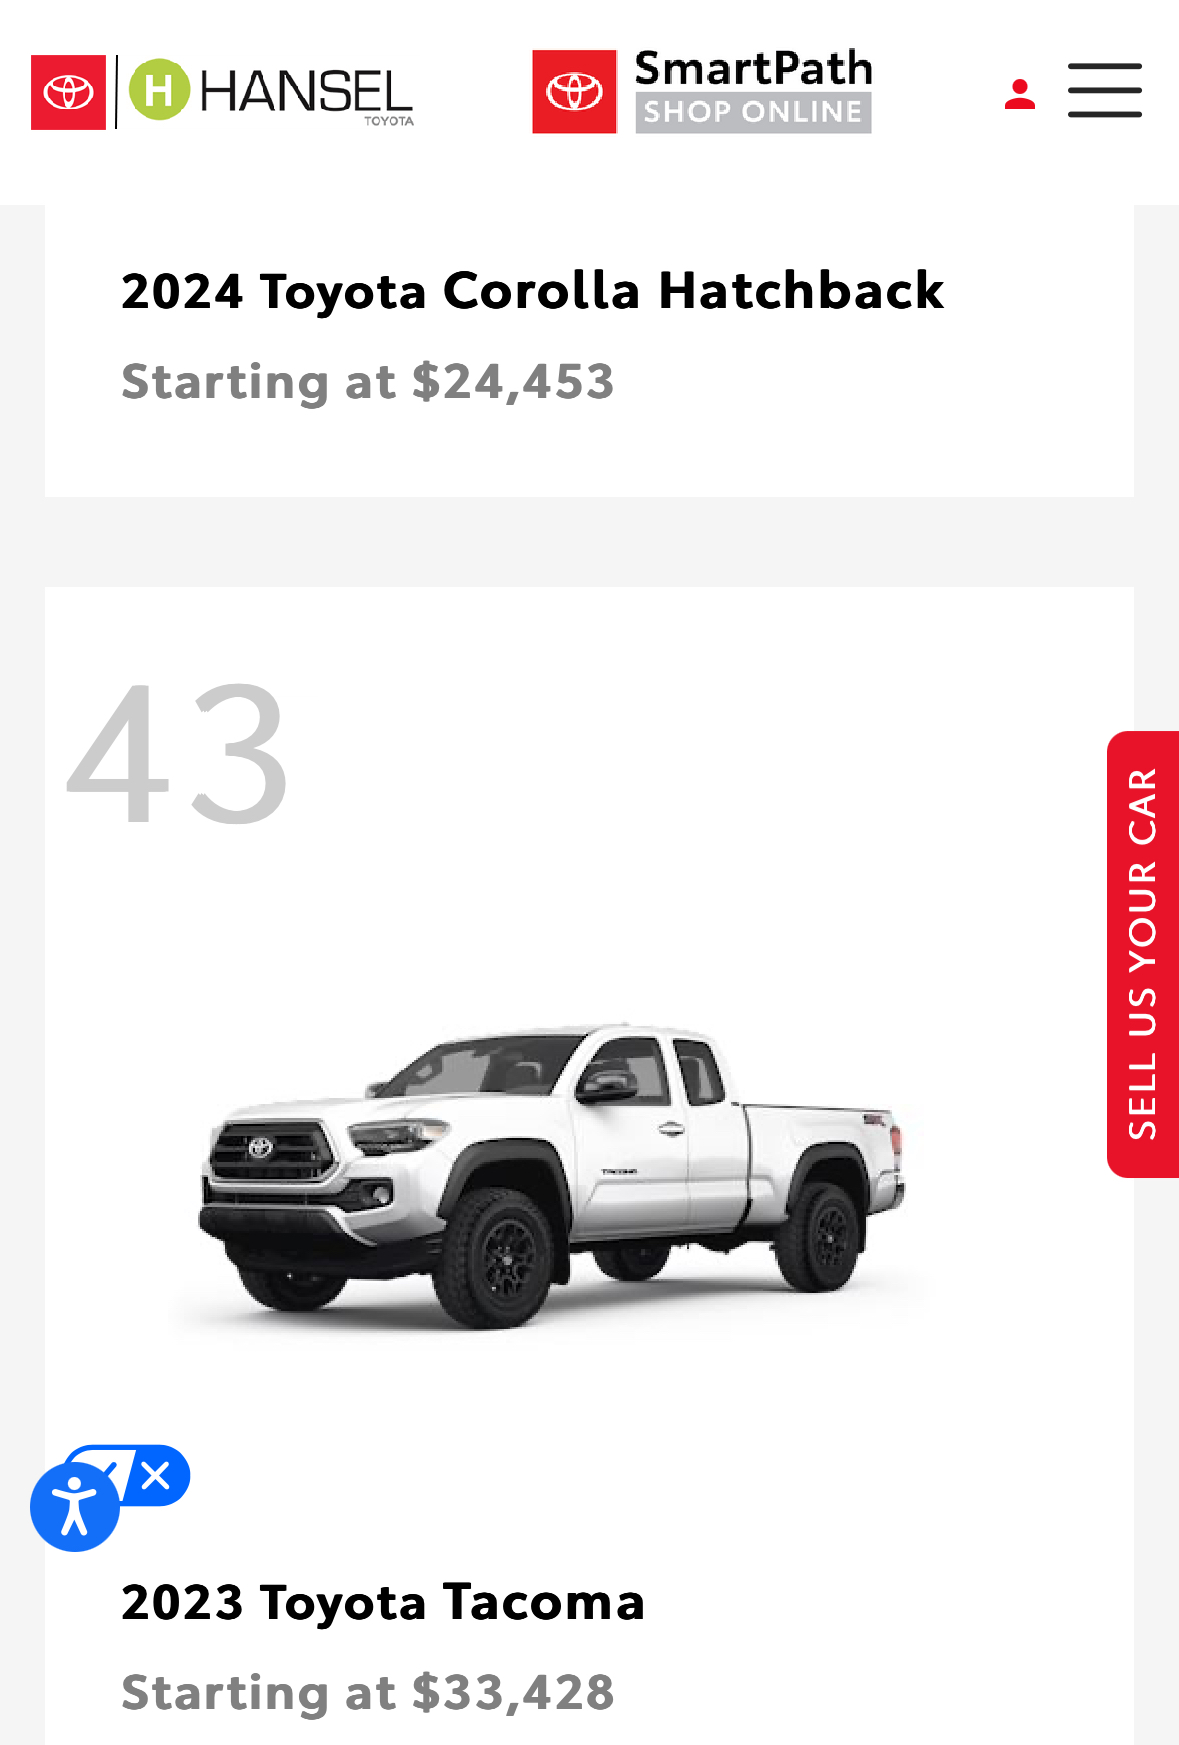 2024 Tacoma Edited. First 2024 TRD Off-Road showed up in pending dealer inventory IMG_9751